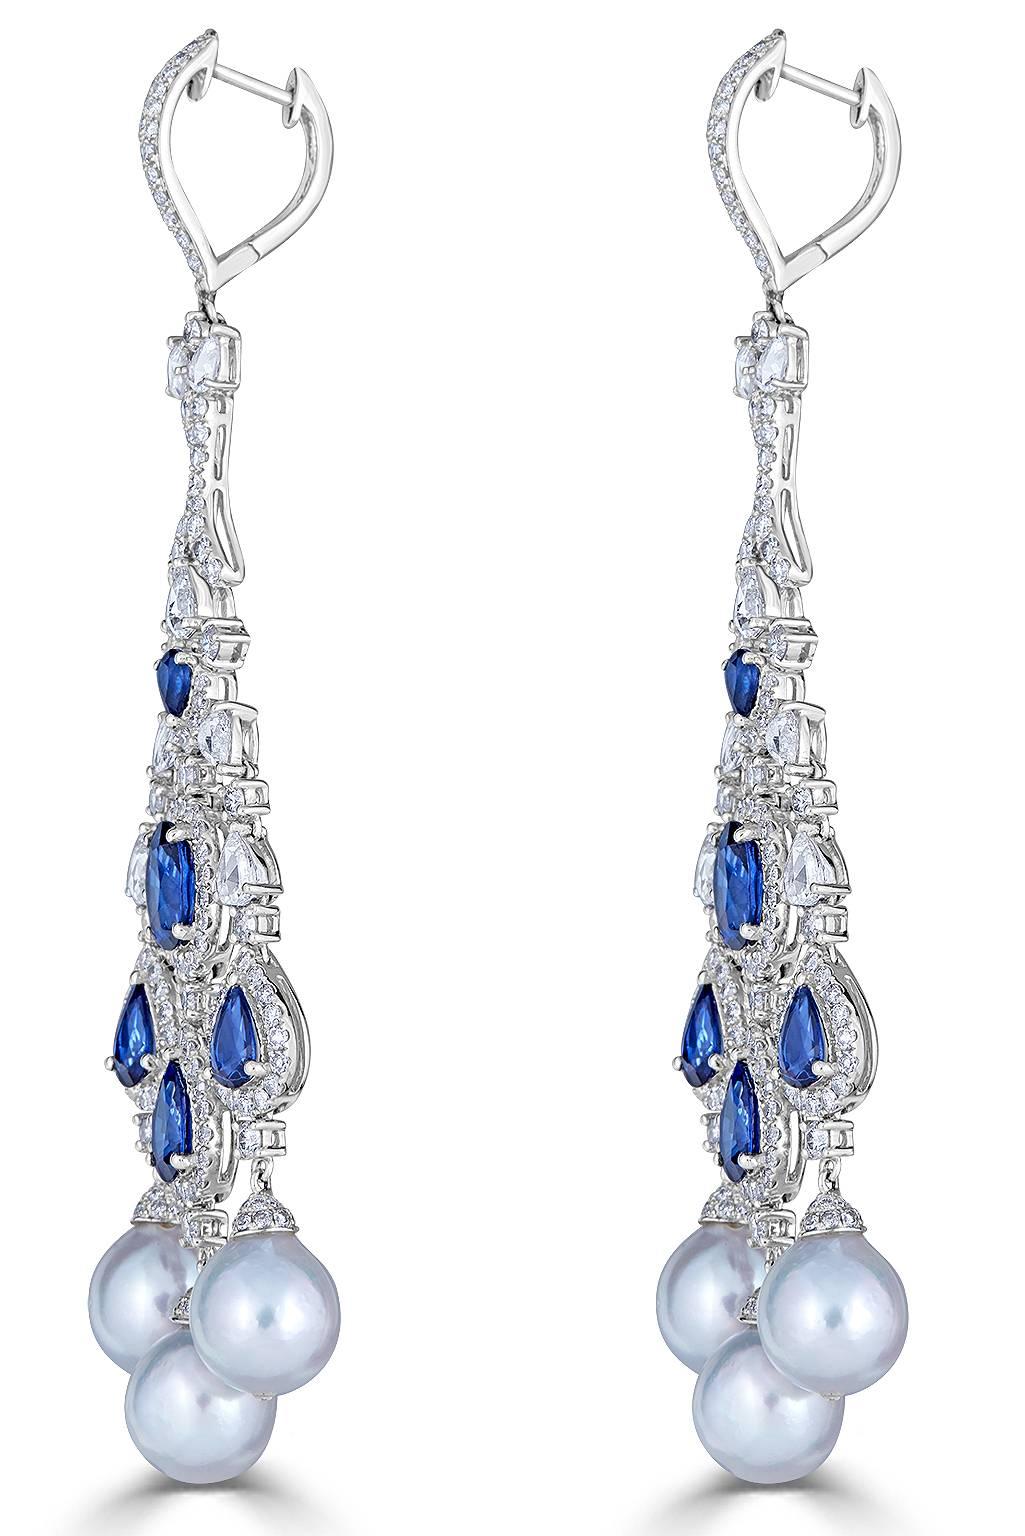 Looking for a classic, regal and chic earring for your next big event?  Then this one is for you!  Gray pearls, white diamonds, and blue sapphire, what more can you ask for?  Post / Snap Hinge

Diamond approx. - 3.99tcw
Blue Sapphire approx. -